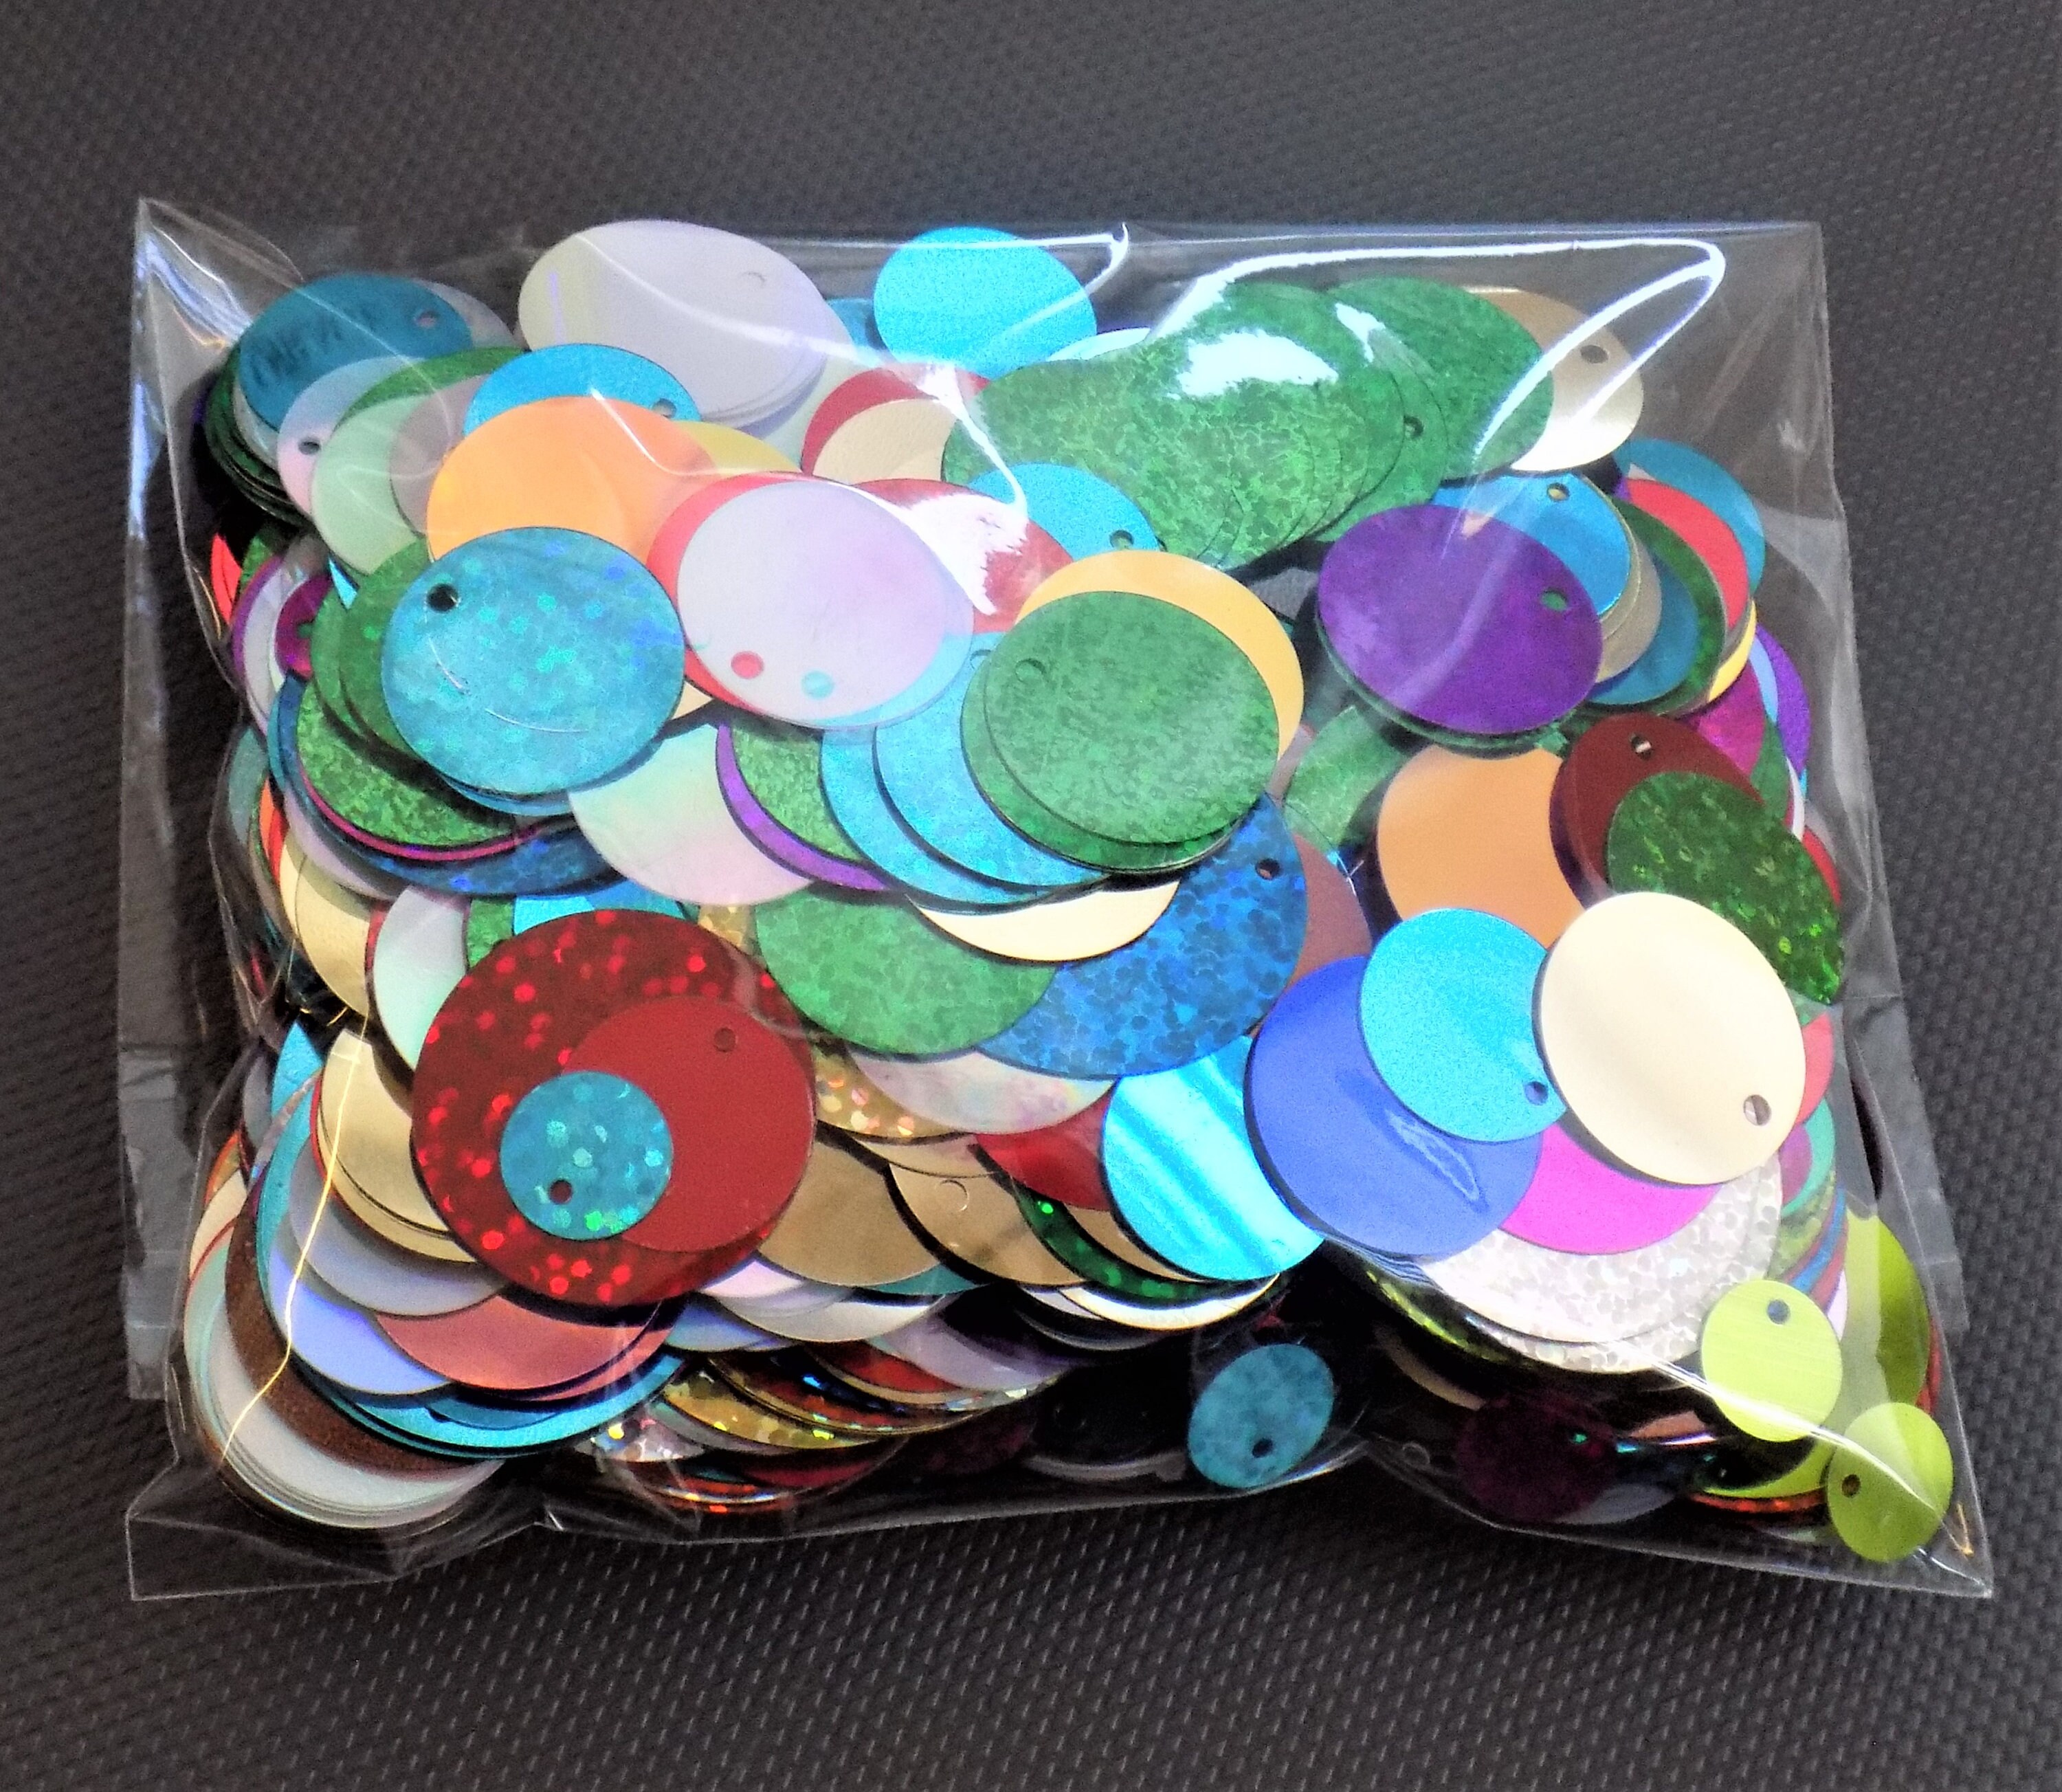 60Pcs 25mm Large Sequins with 1 side hole pvc flat round loose sequin  Paillettes Sewing craft